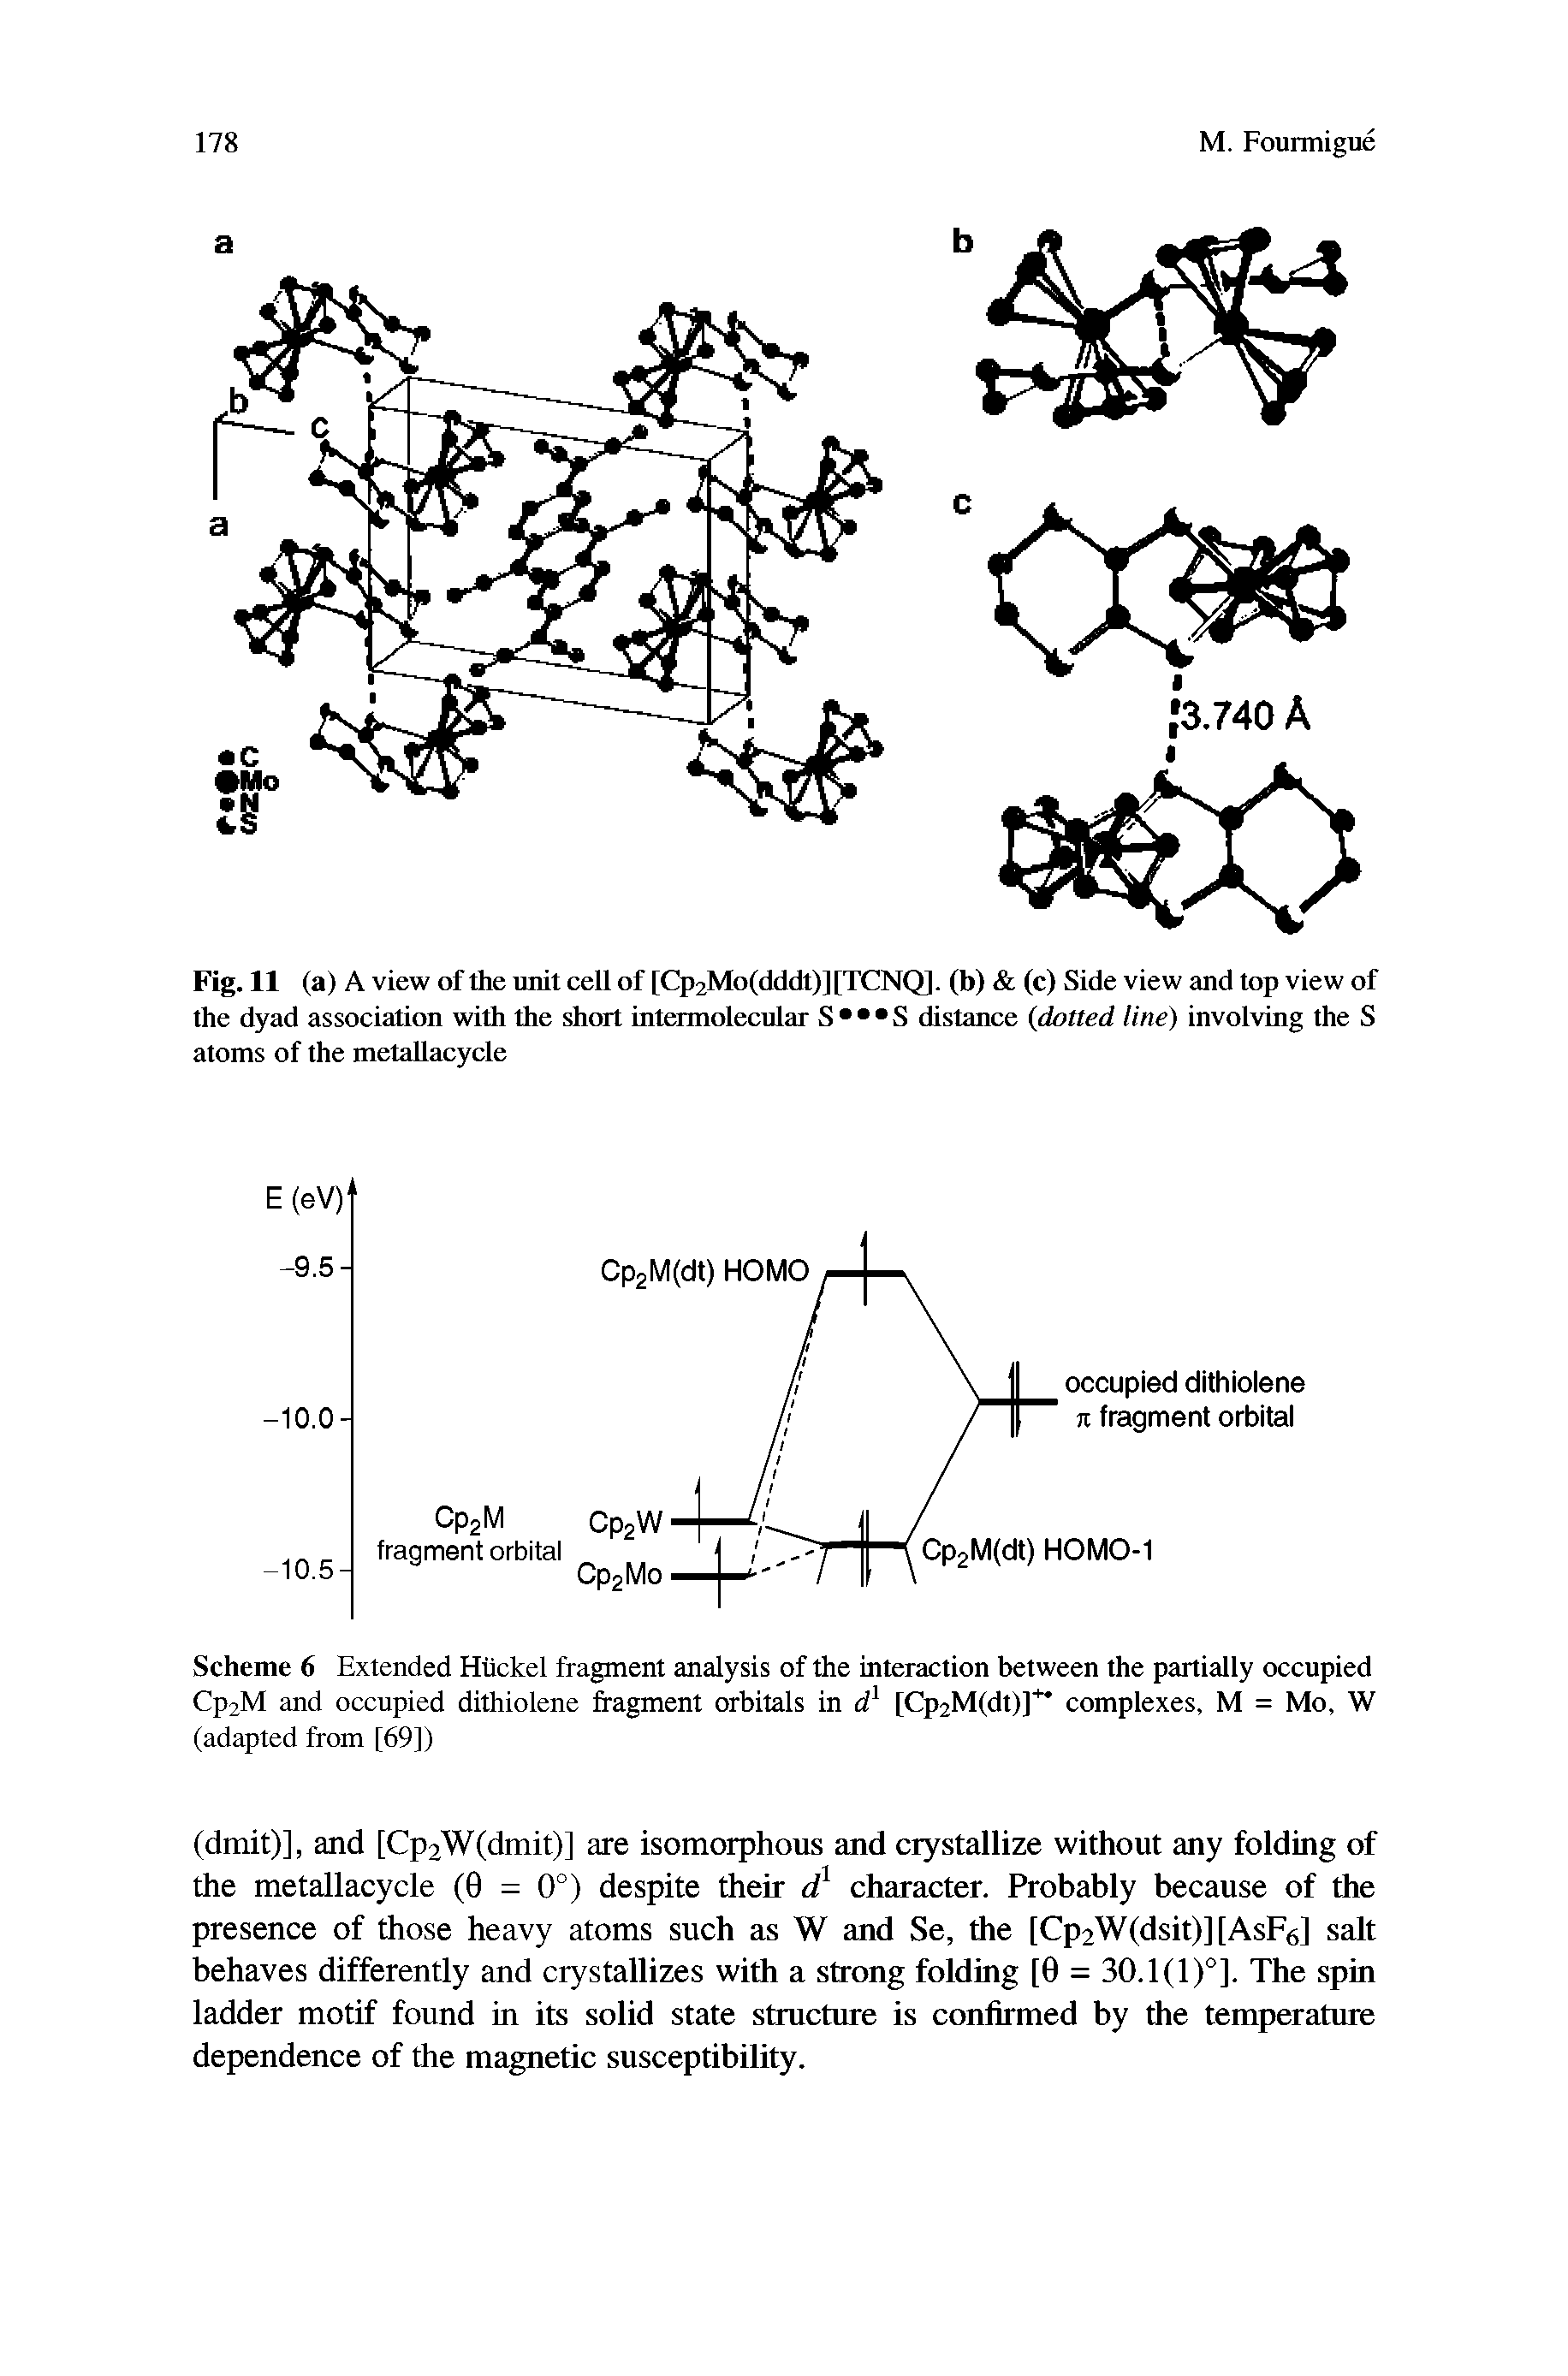 Scheme 6 Extended Htickel fragment analysis of the interaction between the partially occupied Cp2M and occupied dithiolene fragment orbitals in d1 [Cp2M(dt)]+ complexes, M = Mo, W (adapted from [69])...